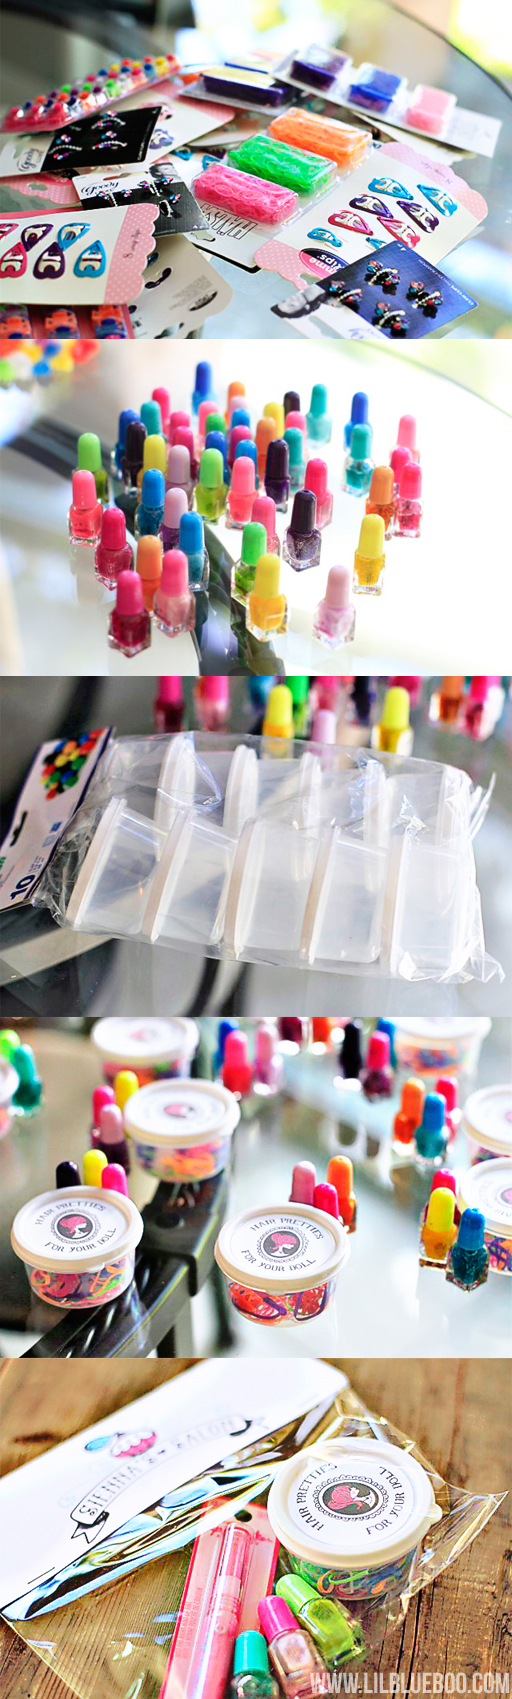 Party Favor Bags: Lil Blue Boo's Top 10 DIY Party Tips and Behind the Scenes via lilblueboo.com